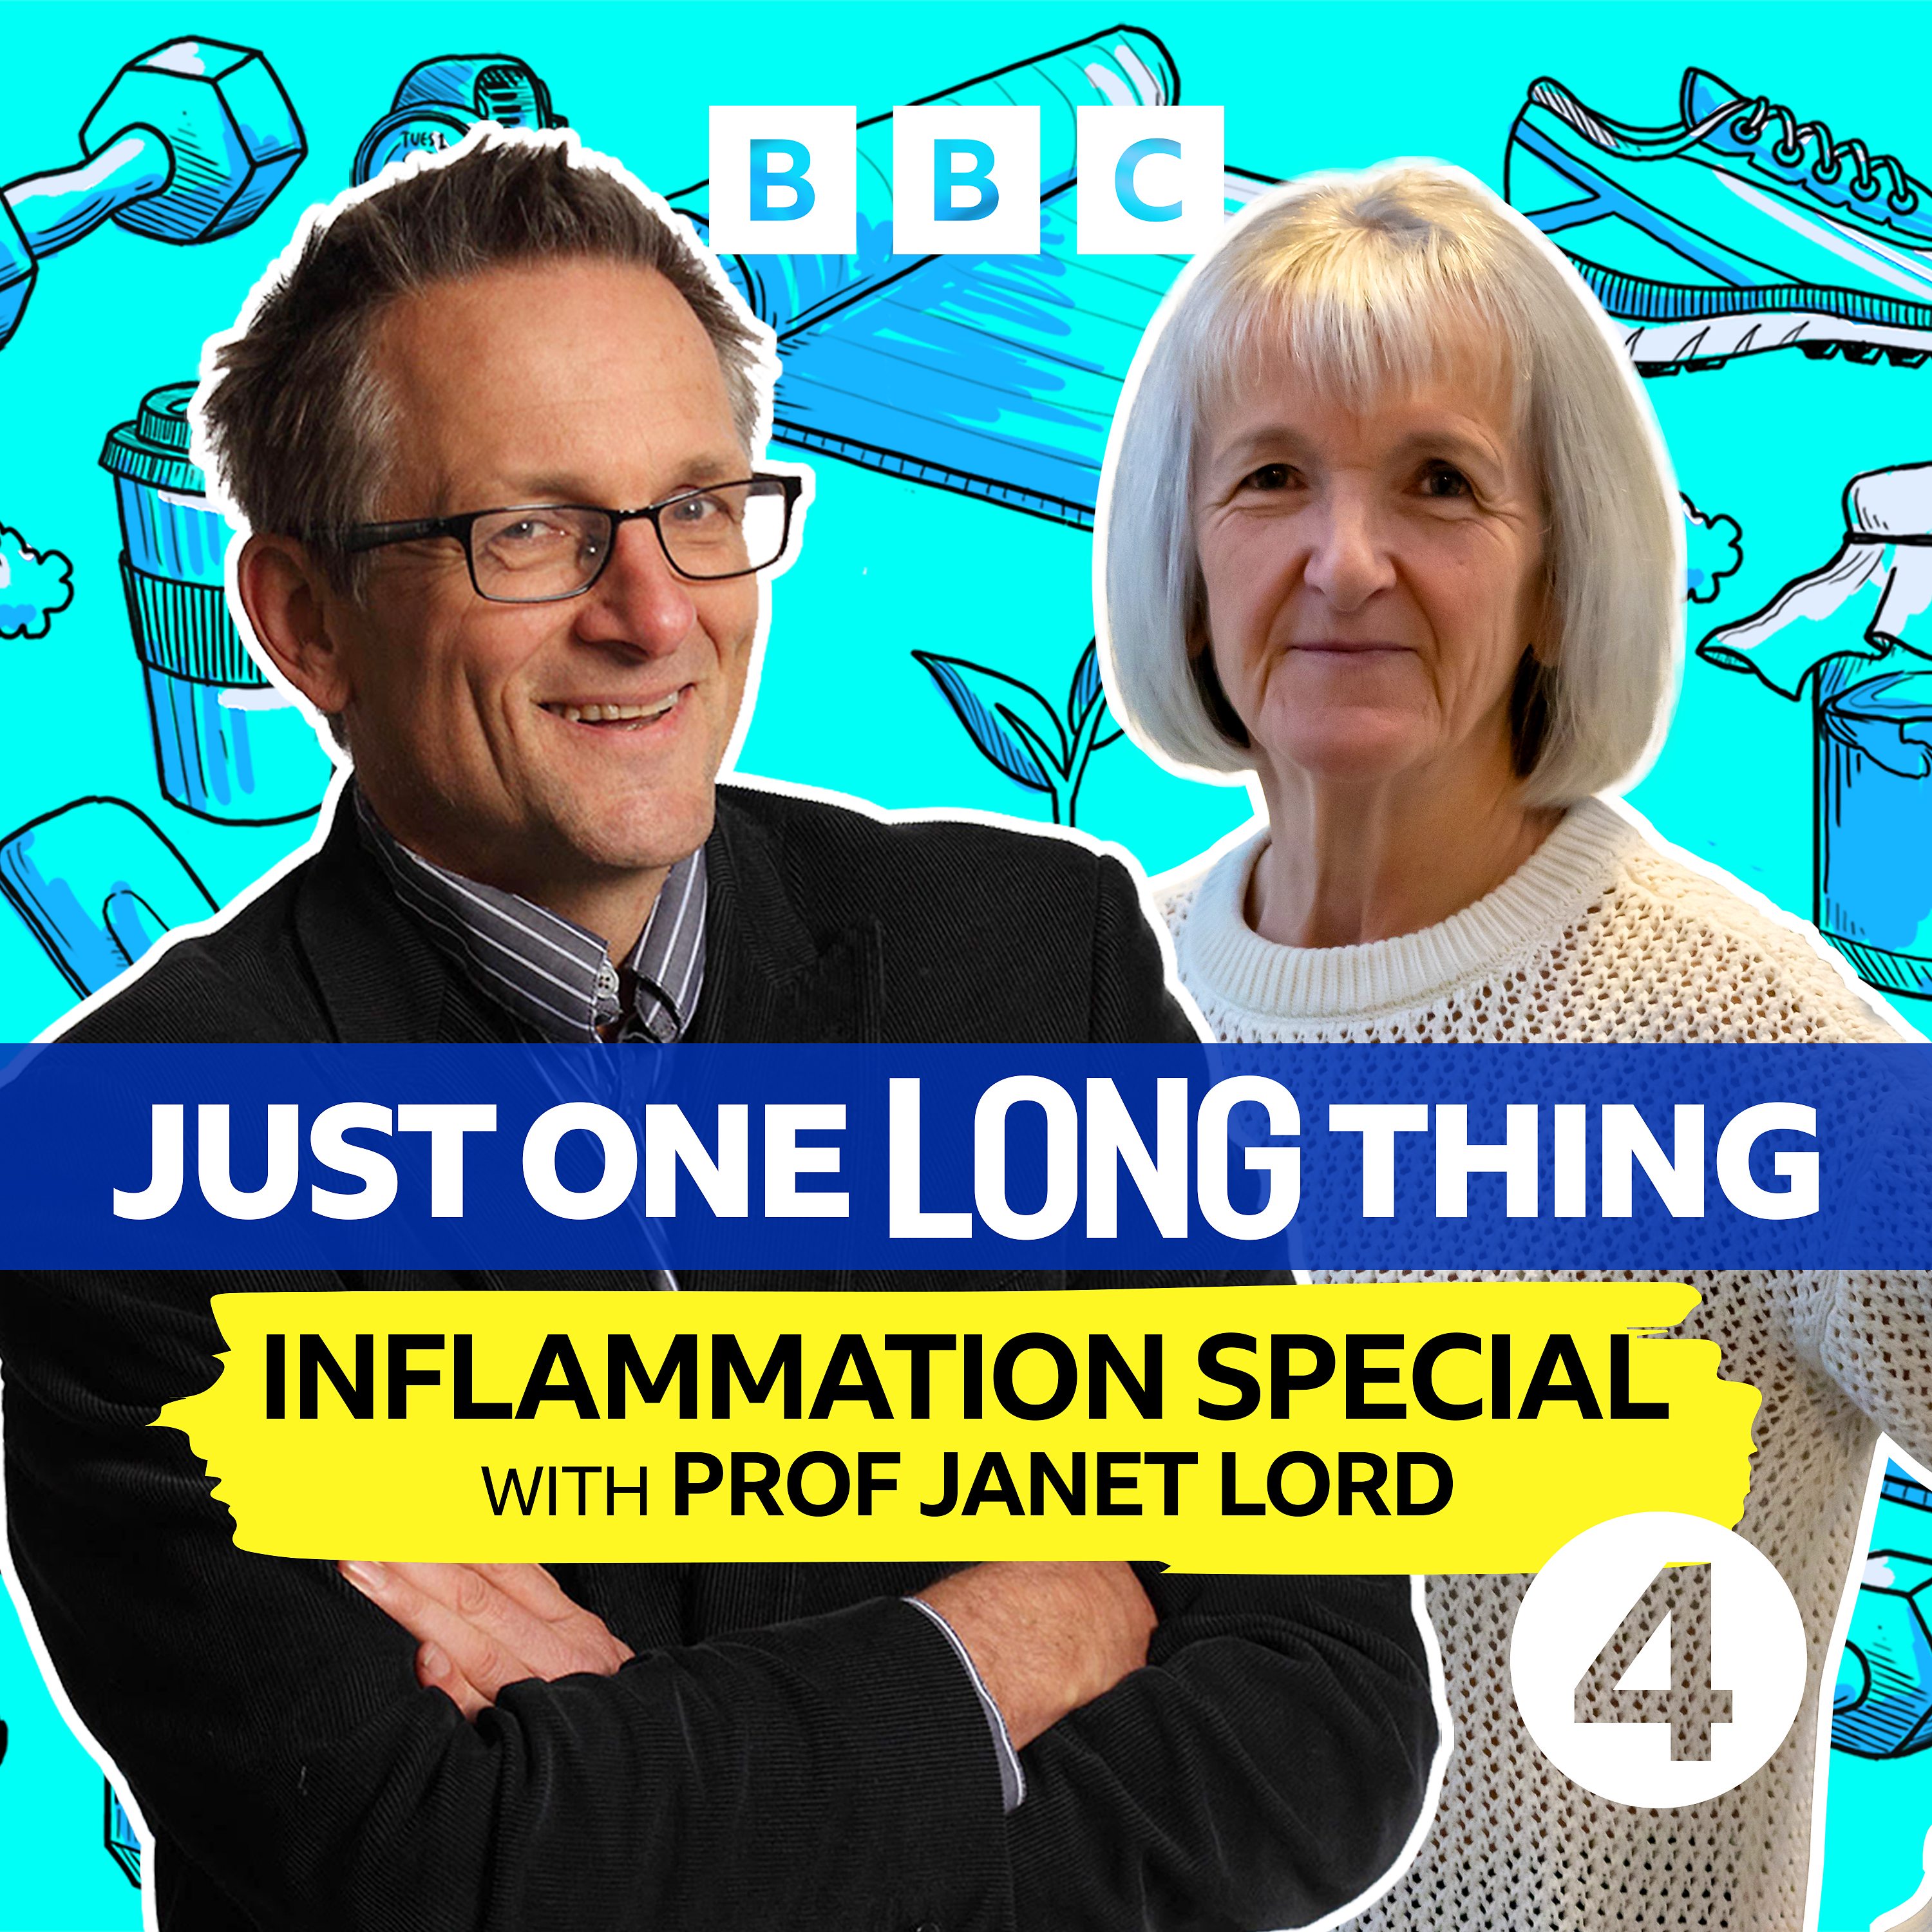 Inflammation Special – with Prof Janet Lord